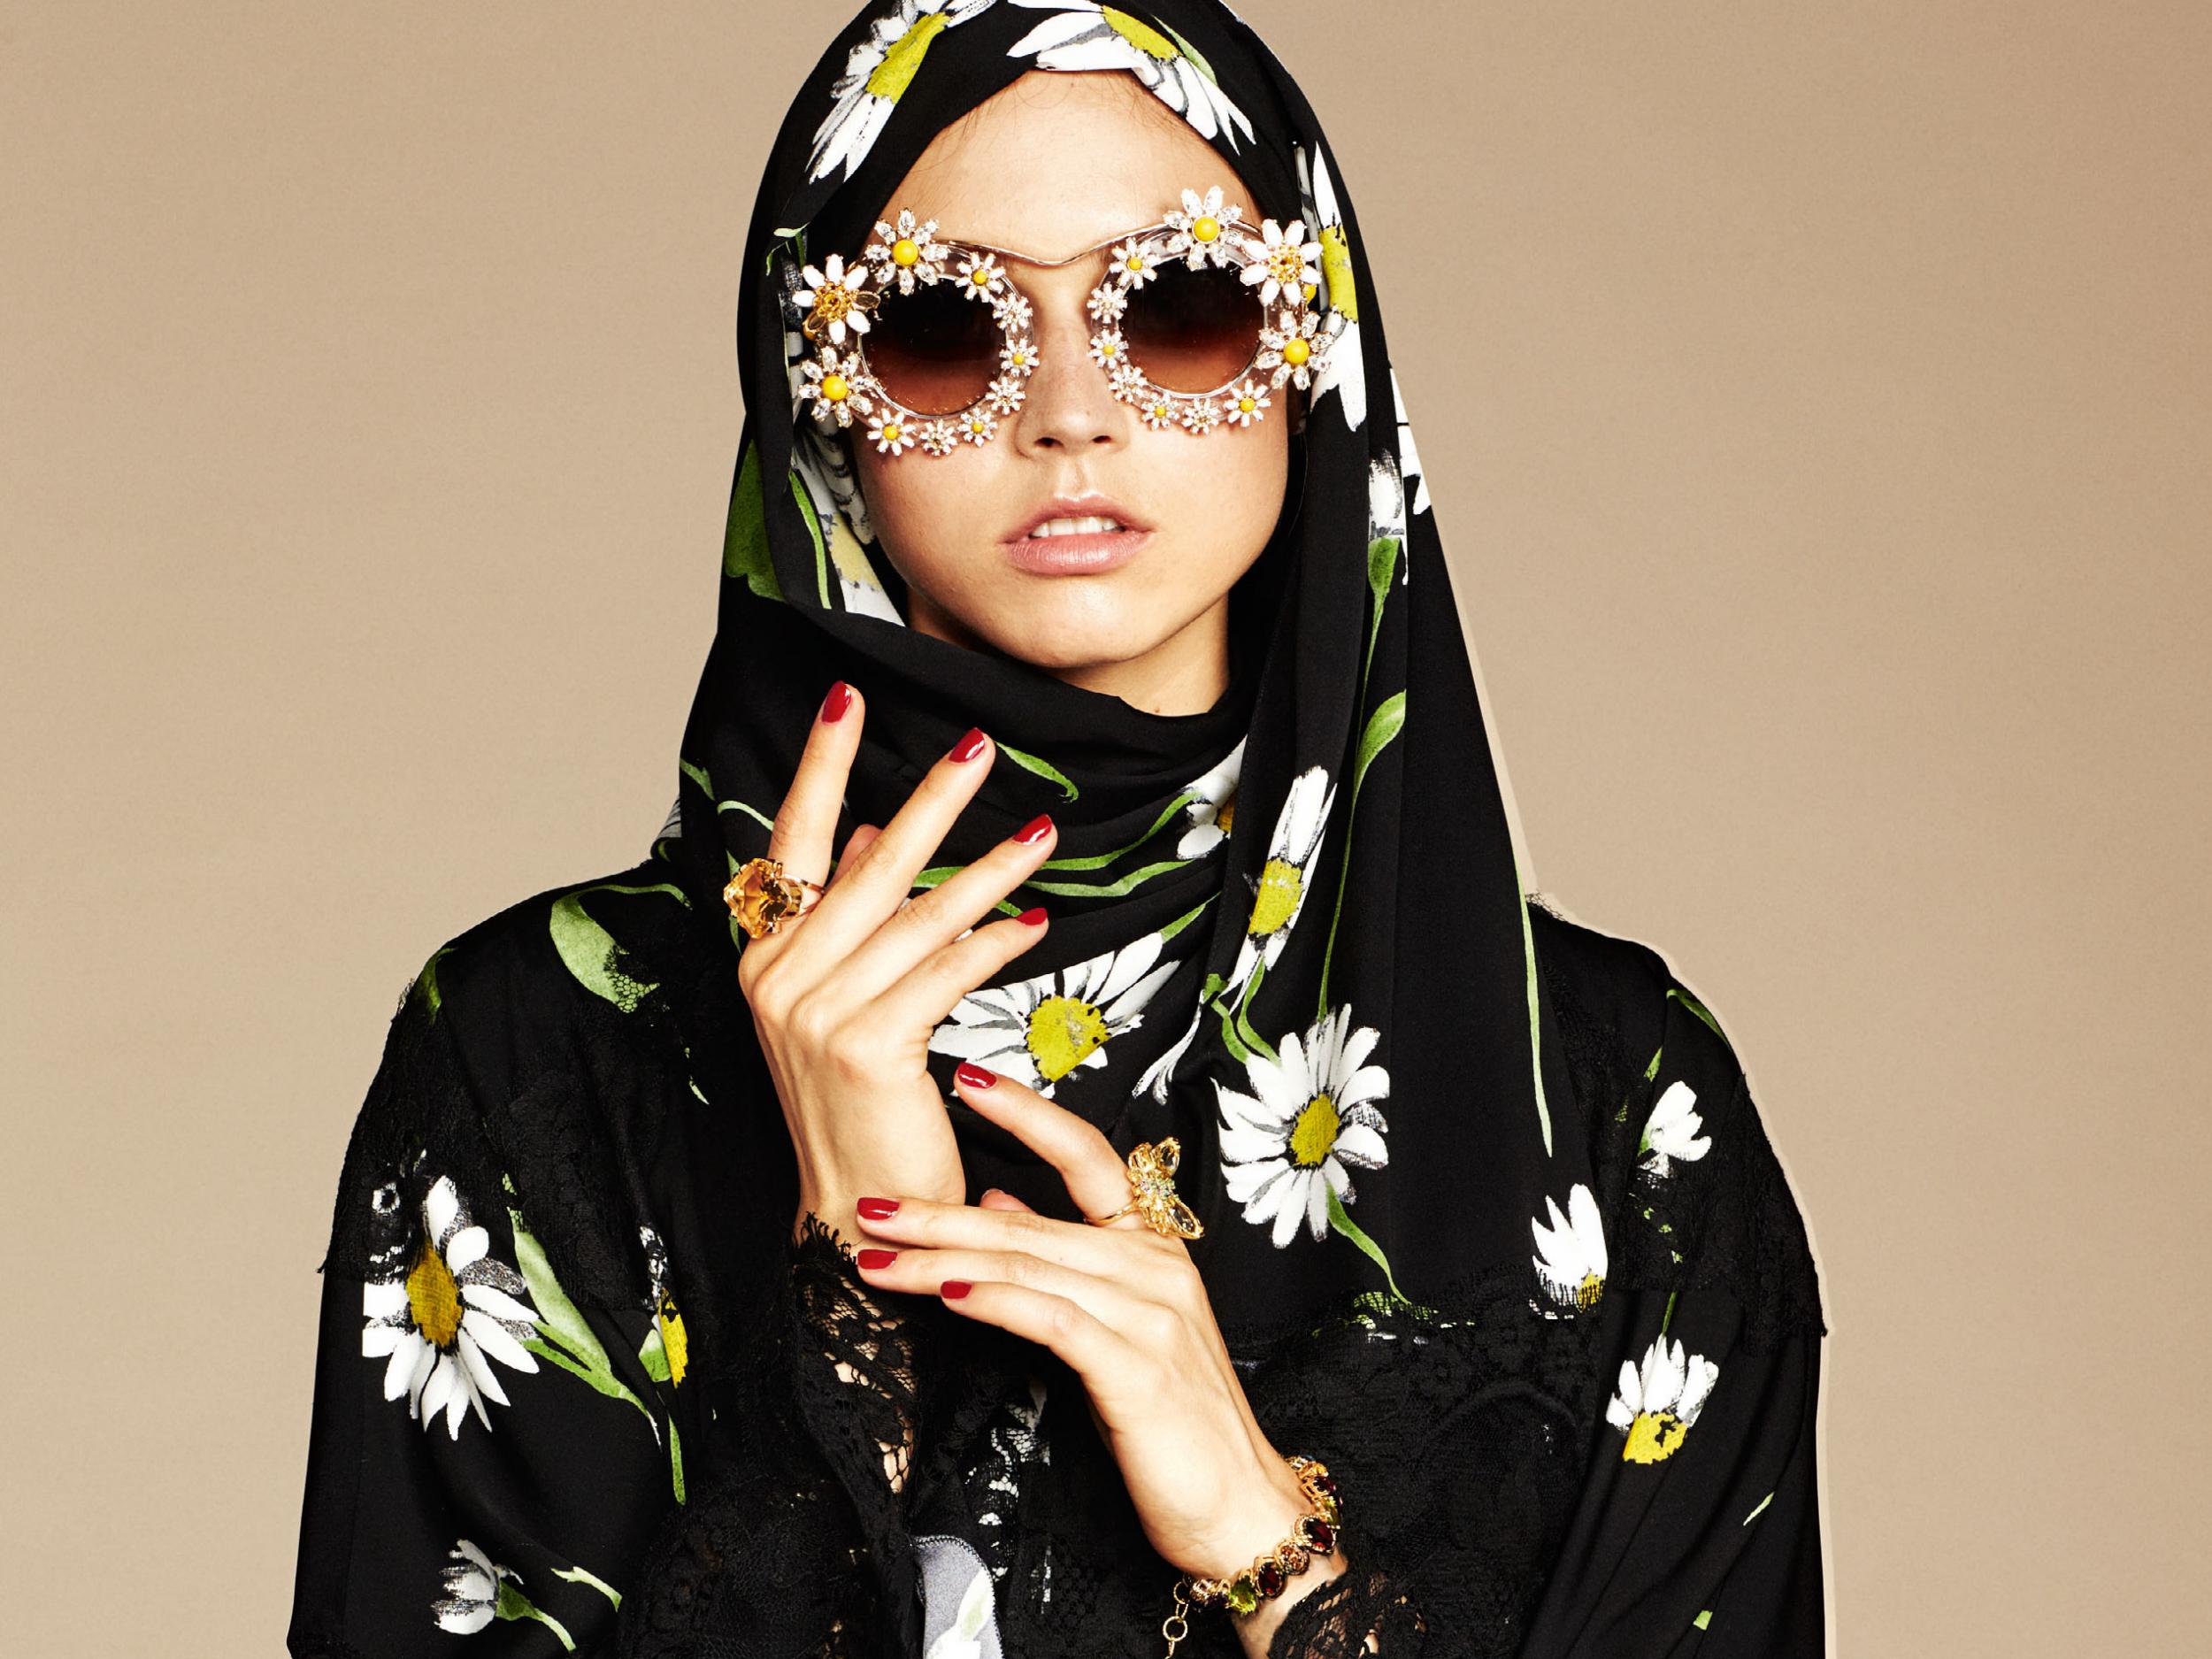 Dolce & Gabbana's luxury hijab collection speaks to financial markets, not  Muslim women, The Independent